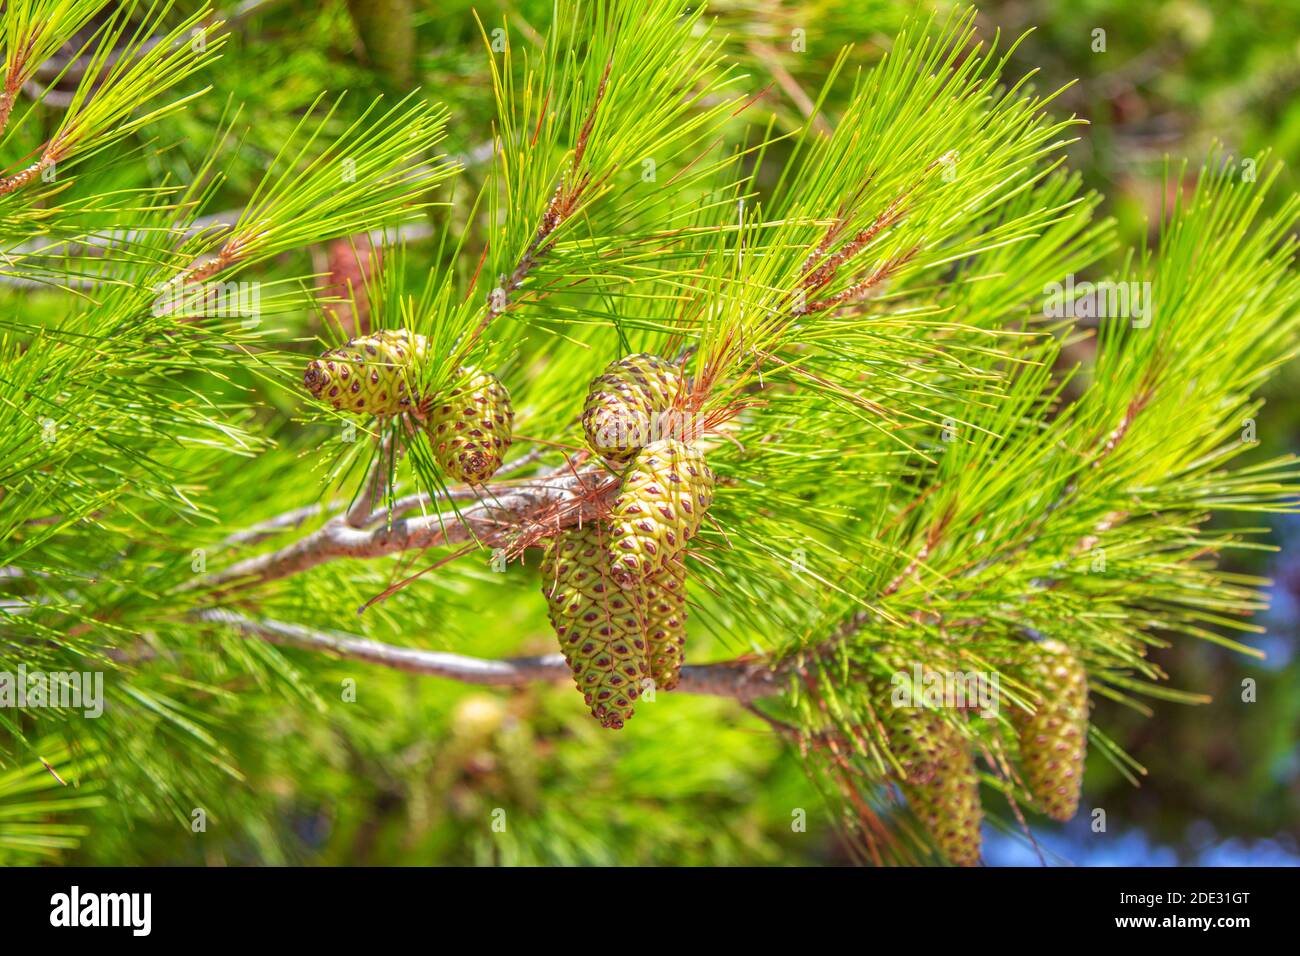 Pine tree branch with corns nature background. Summer forest details Stock Photo